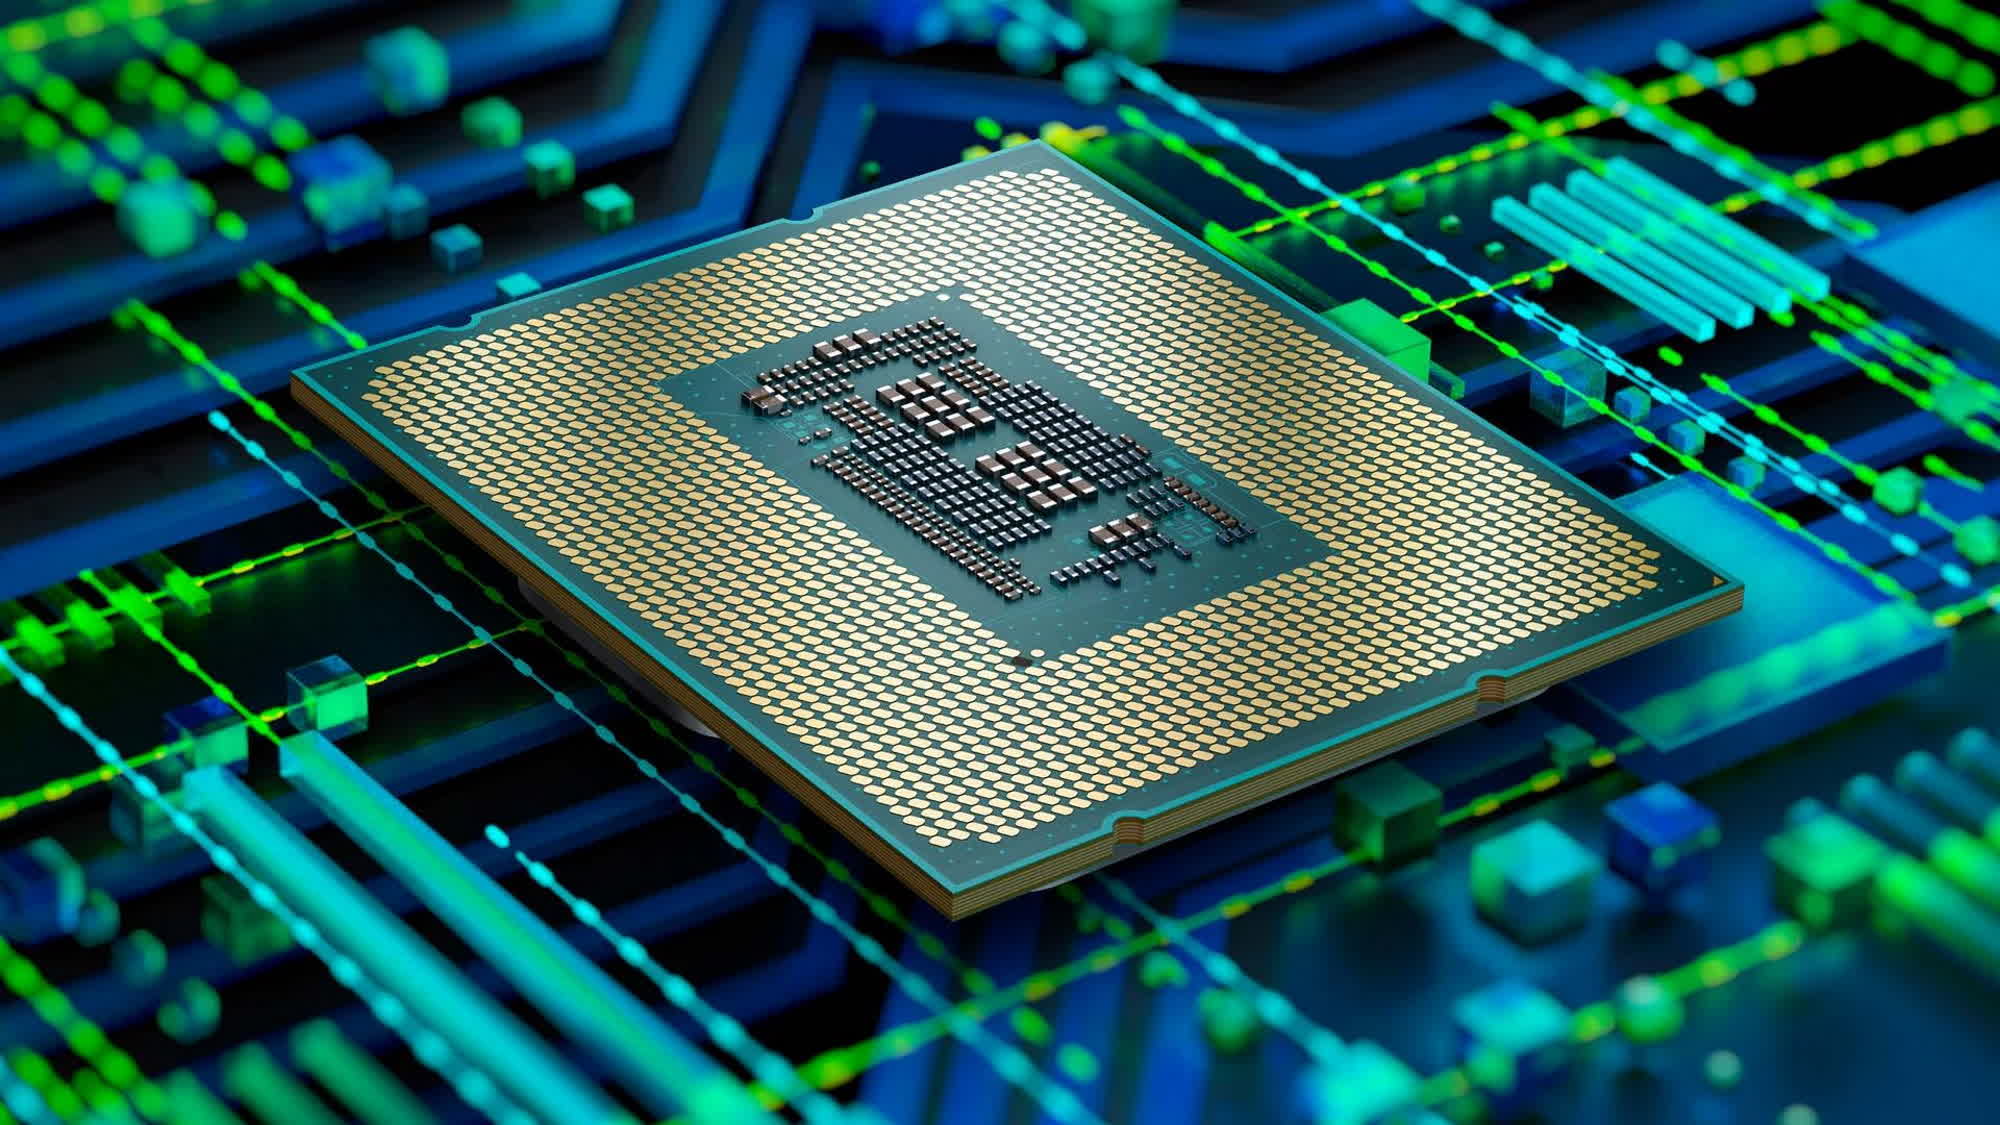 Intel proposes the x86-S architecture for a simpler, more efficient CPU instruction set